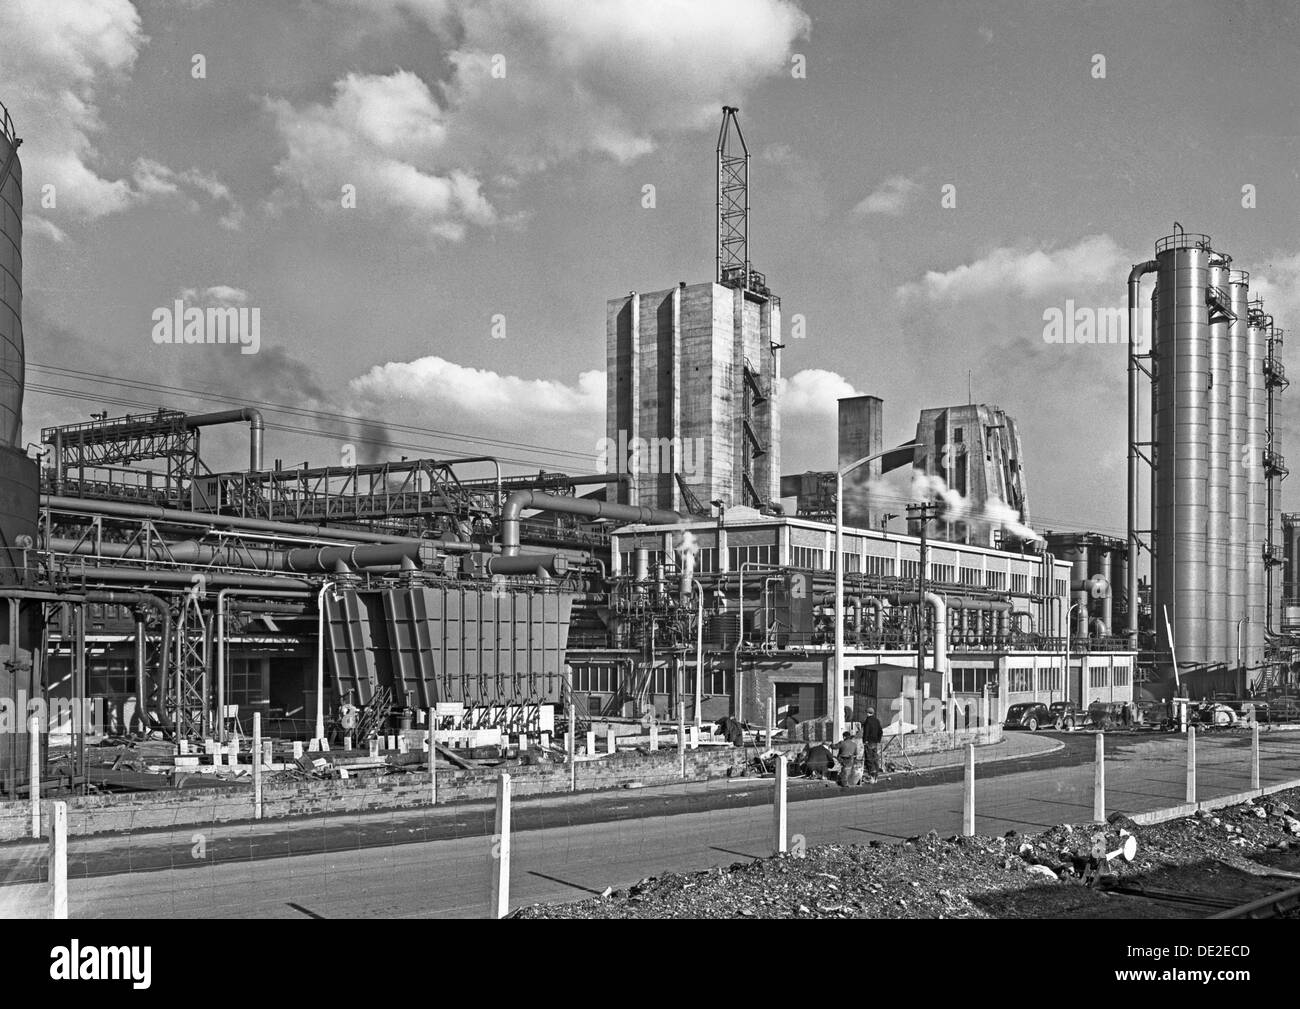 Manvers coal processing plant, Wath upon Dearne, near Rotherham, South Yorkshire, February 1957. Artist: Michael Walters Stock Photo